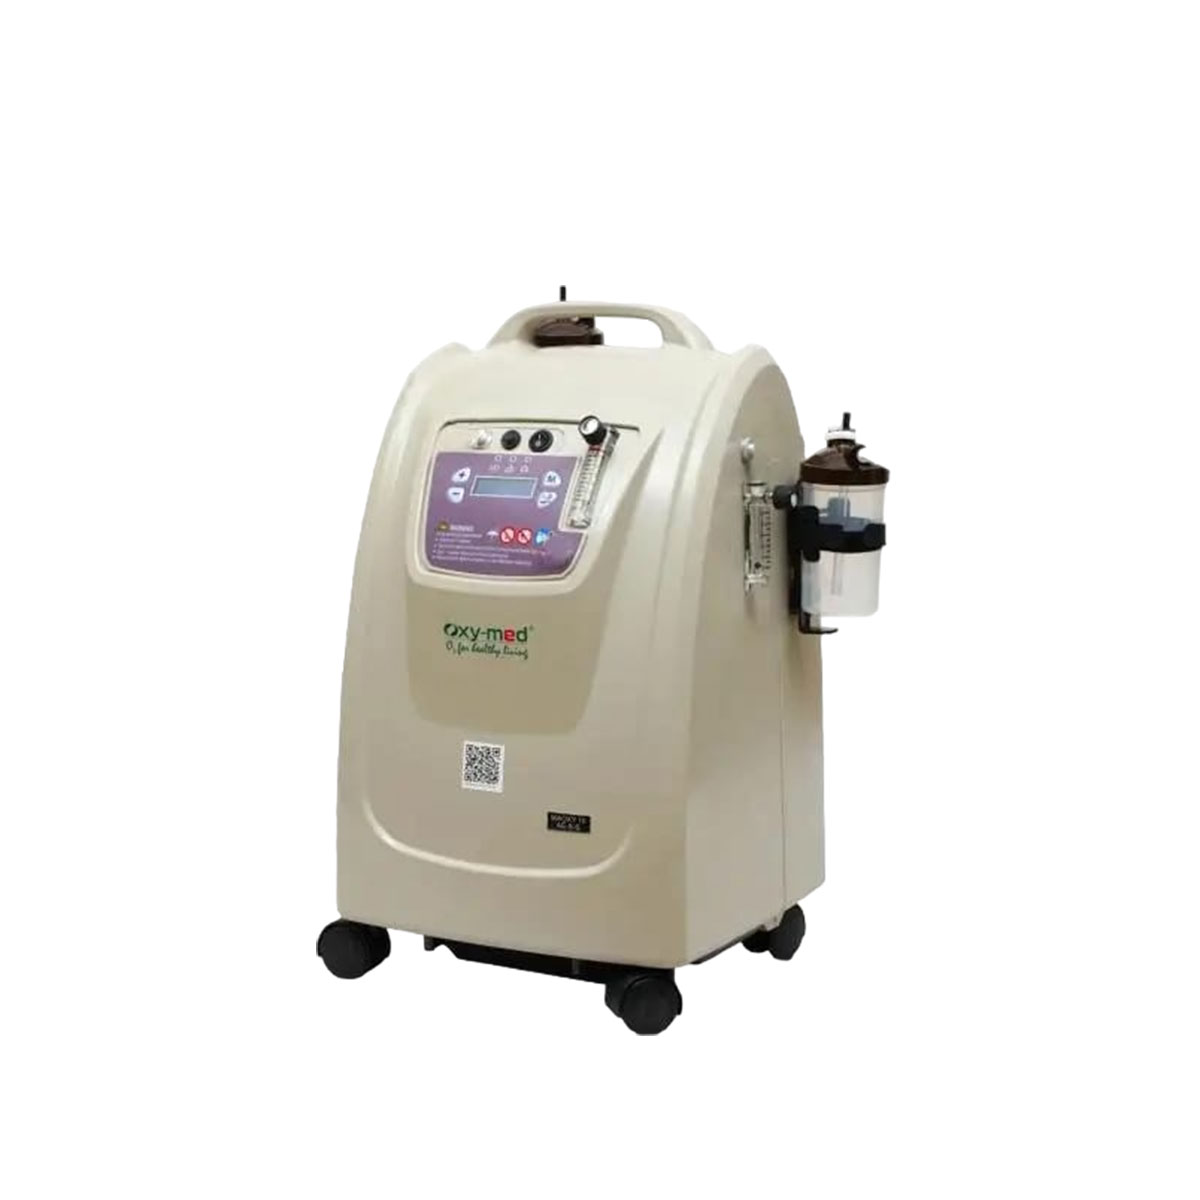 10 Lpm Oxymed Oxygen Concentrator On Sale Suppliers, Service Provider in Delhi ncr